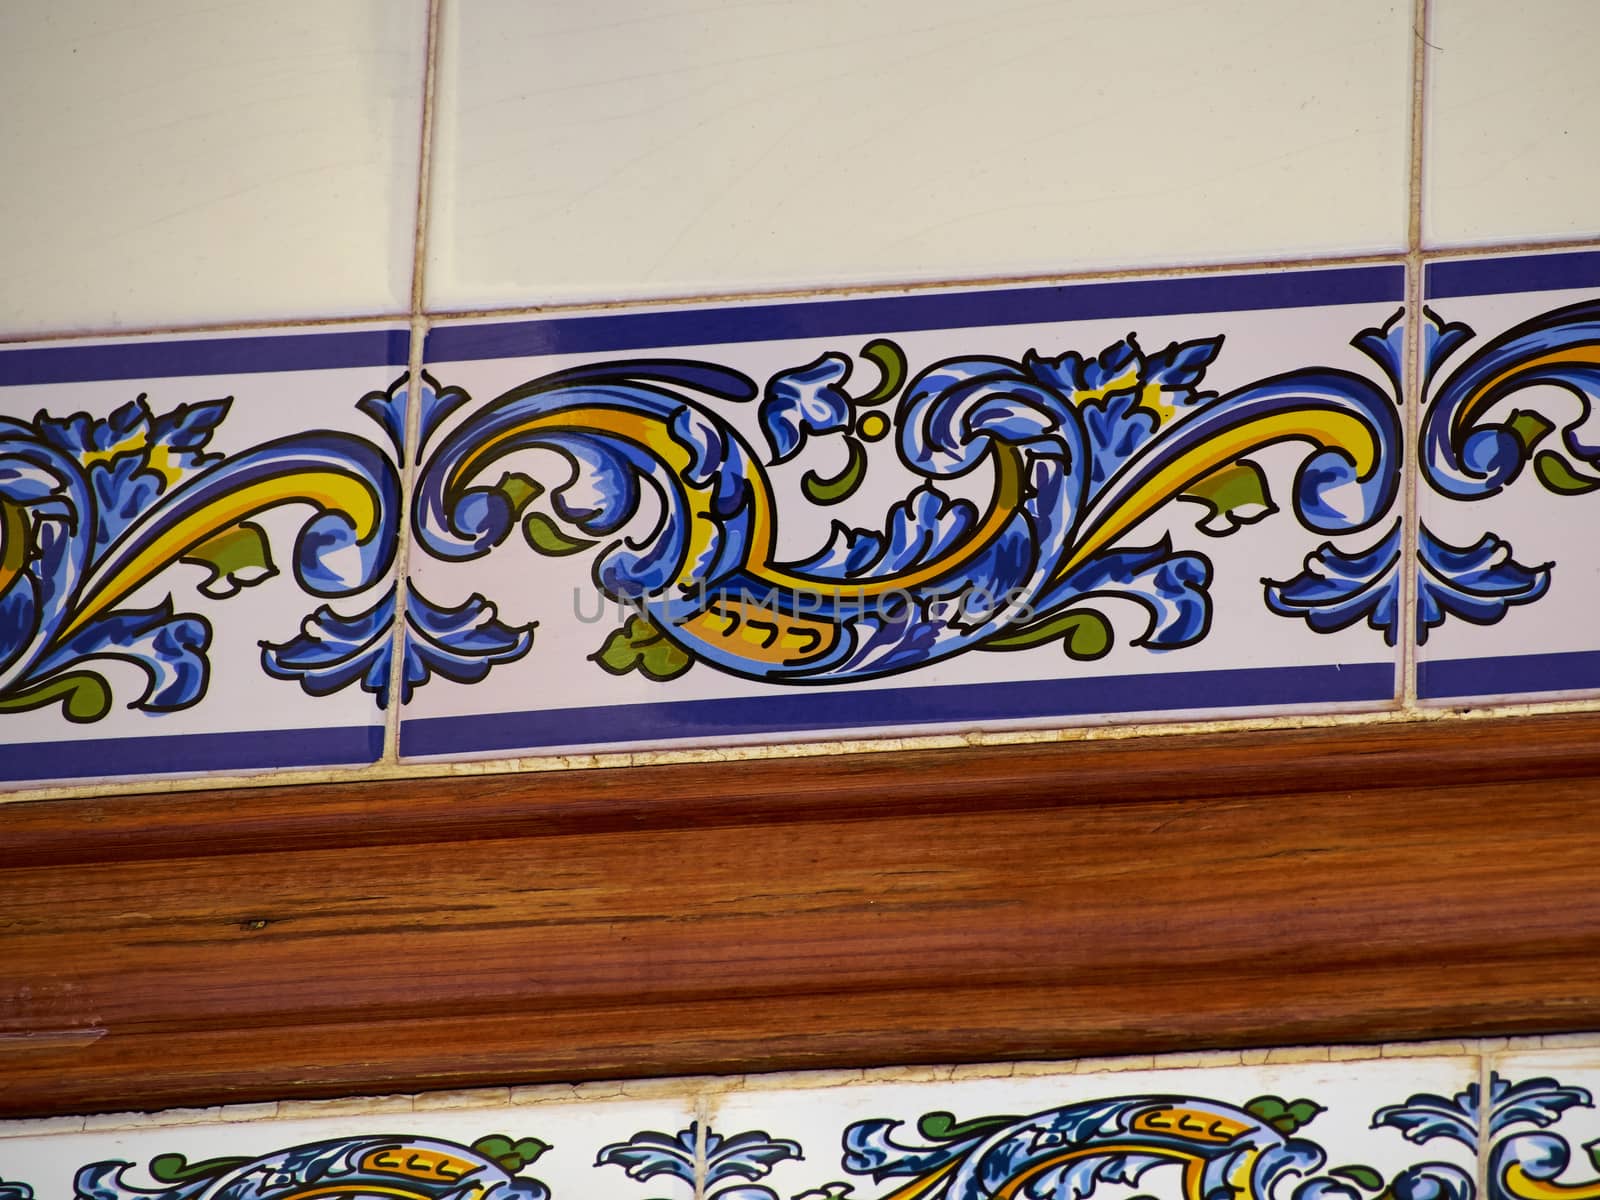 Typical traditional painted by hand glazed Spanish ceramic tiles